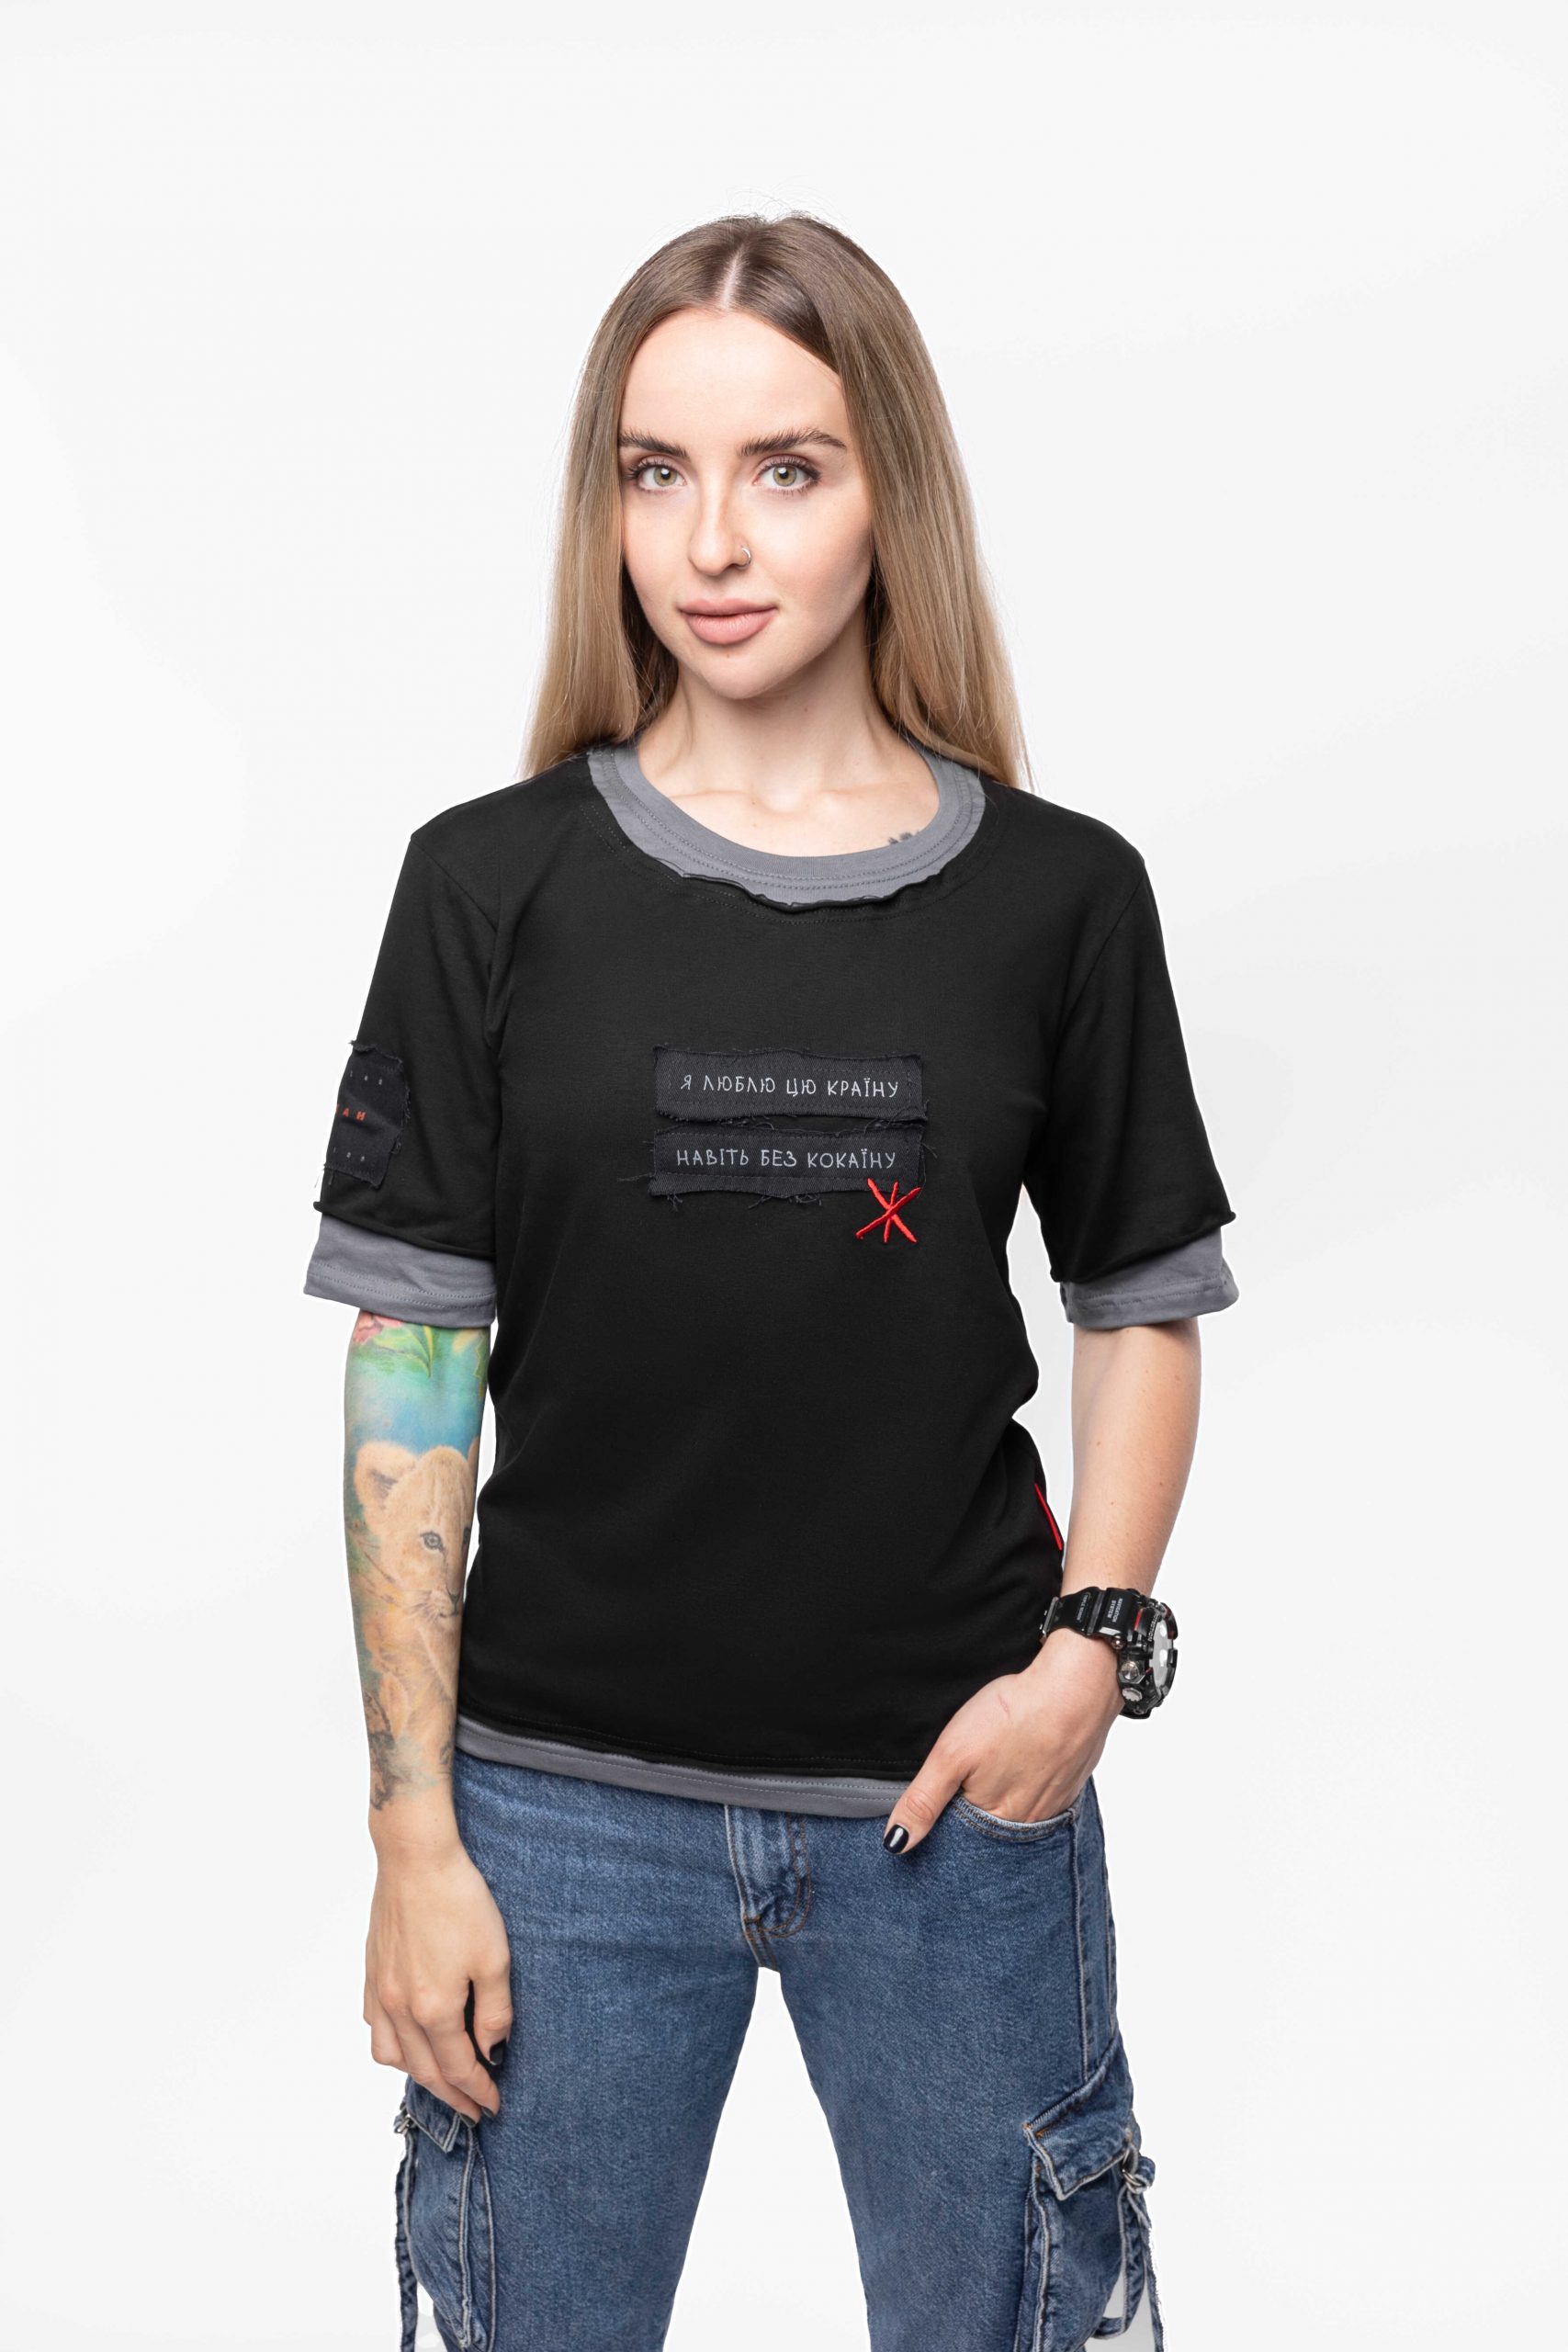 Women's T-Shirt I Love This Country. Color black. .